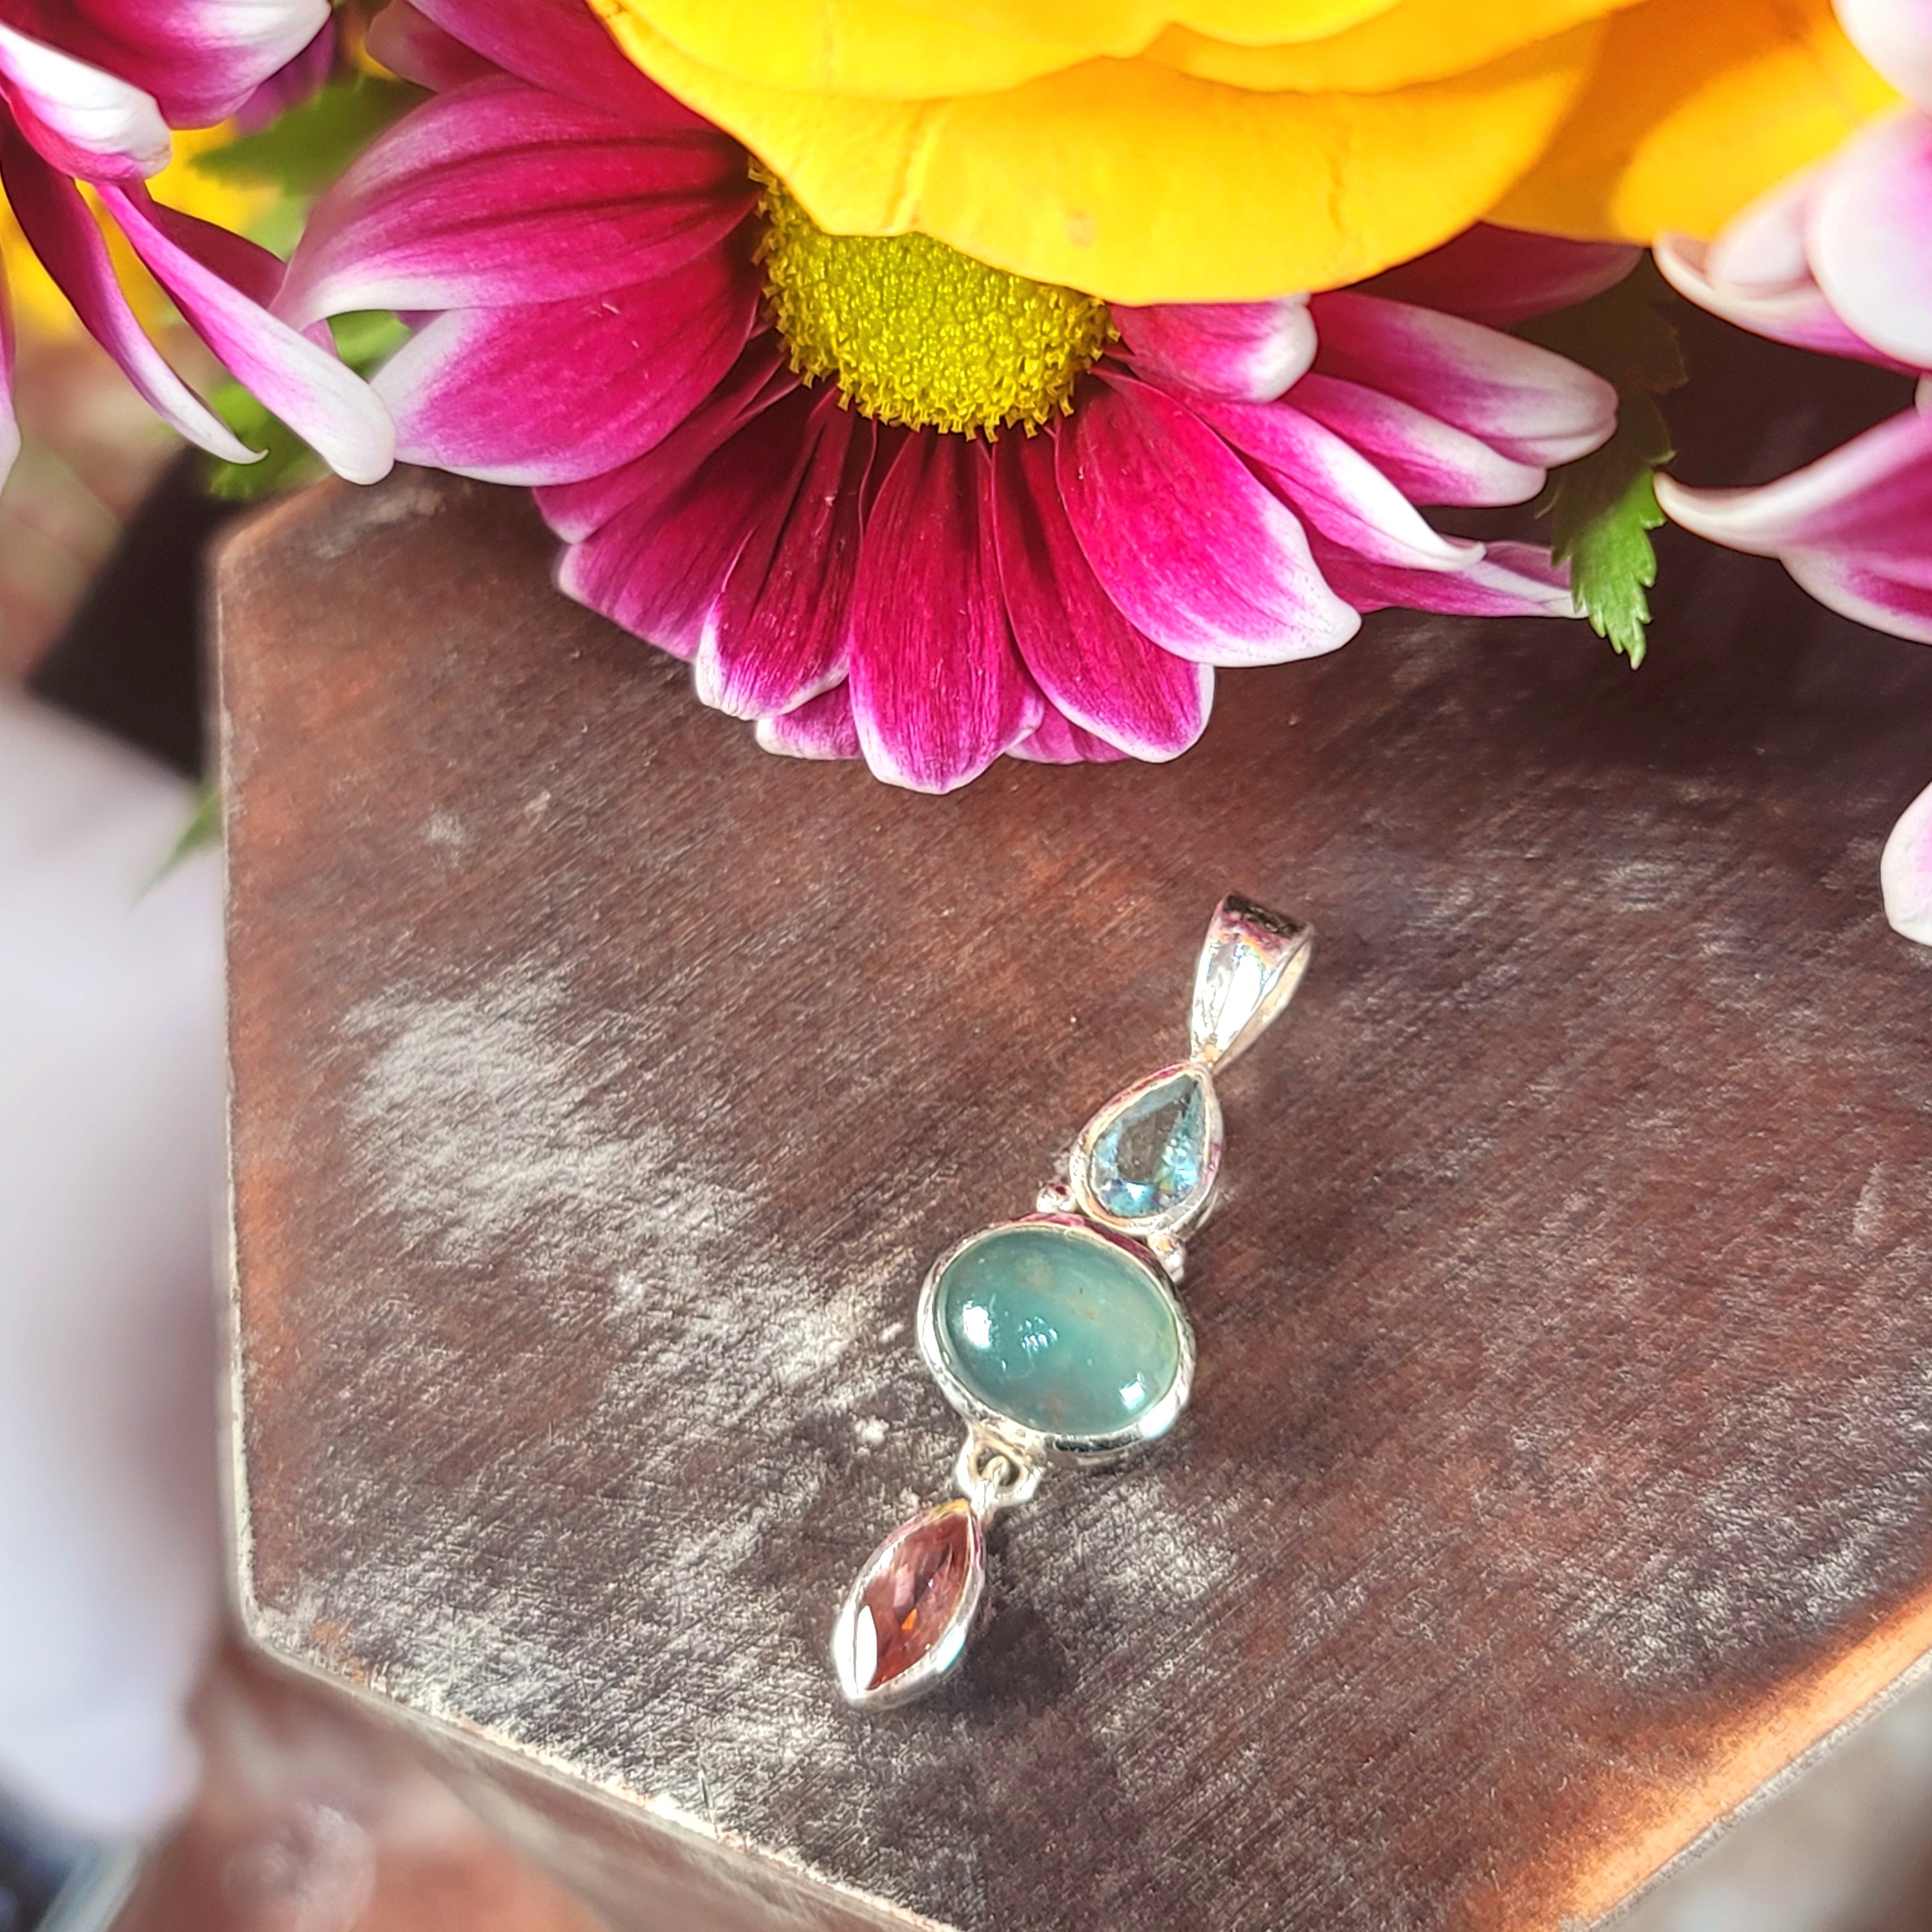 Blue Apatite x Aquamarine x Pink Tourmaline Pendant .925 Silver for Expressing your Heart's Desires